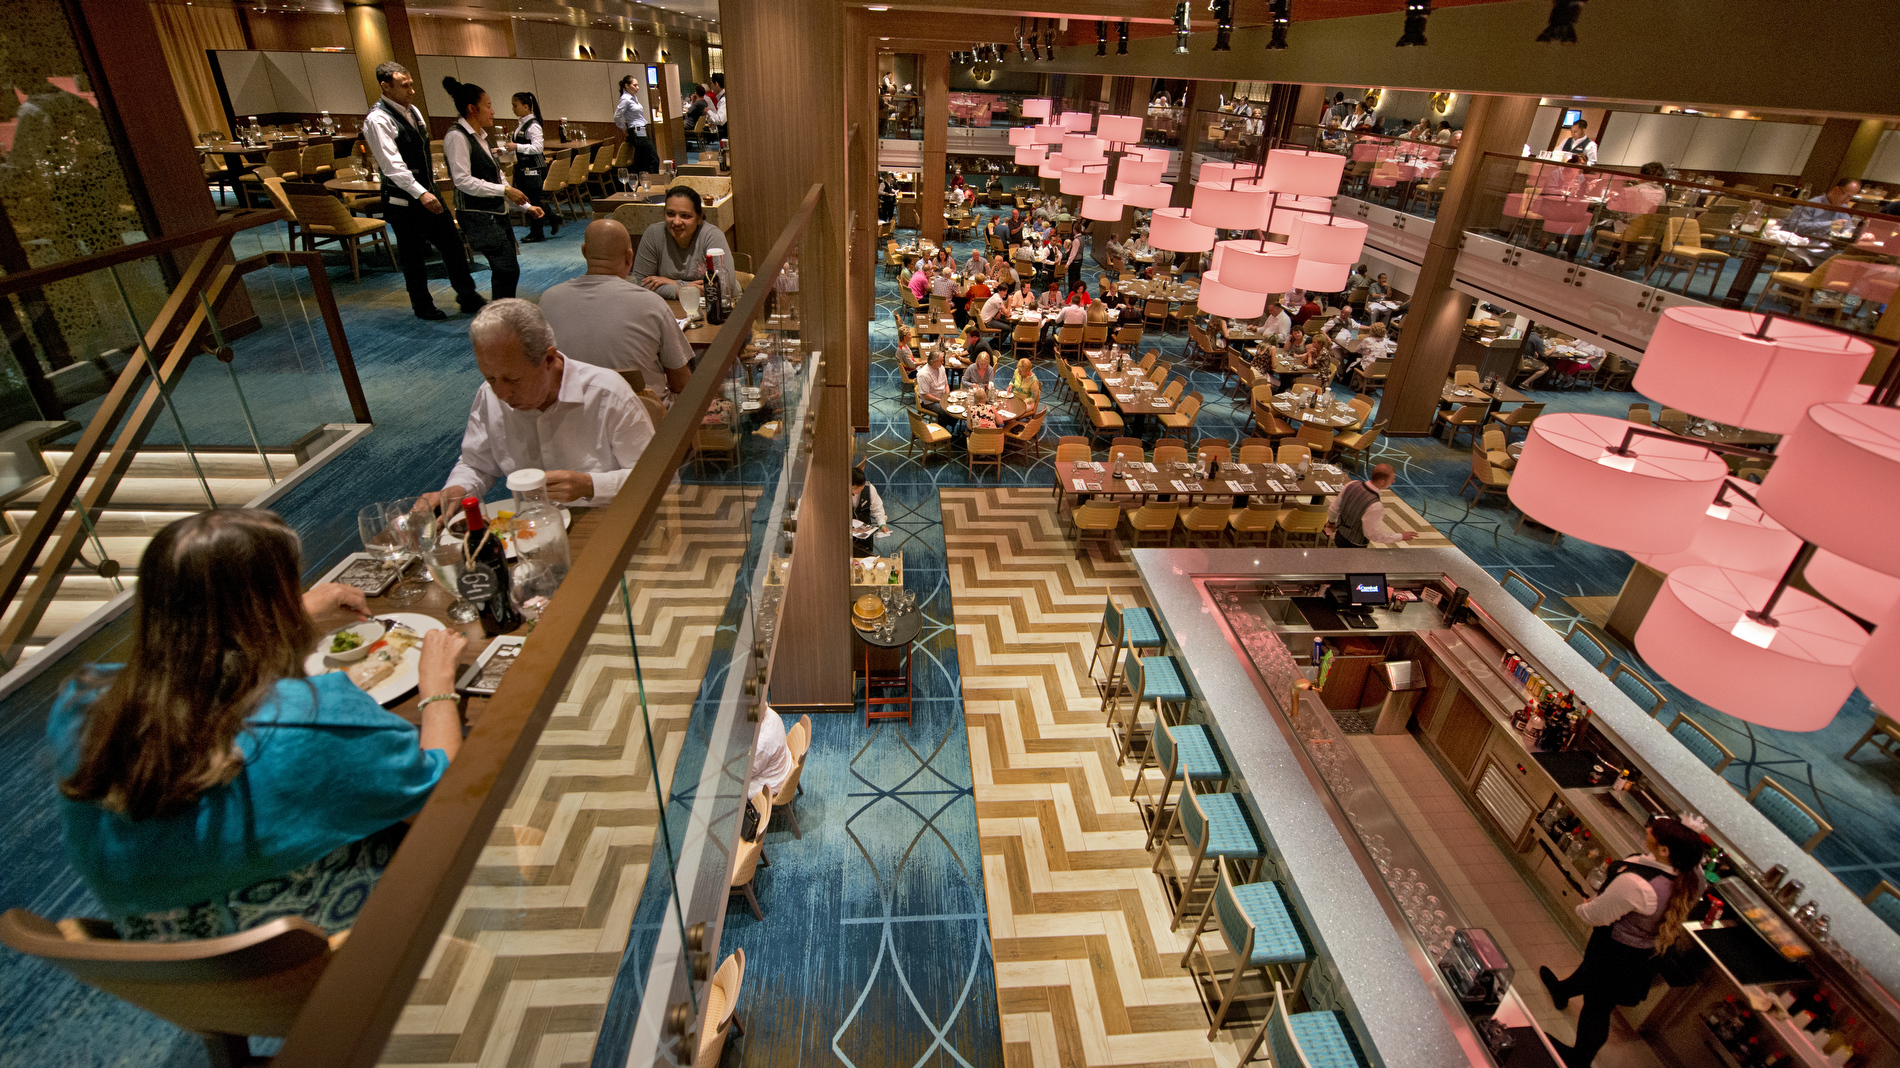 What to Expect From Carnival Horizon's Shopping Experience